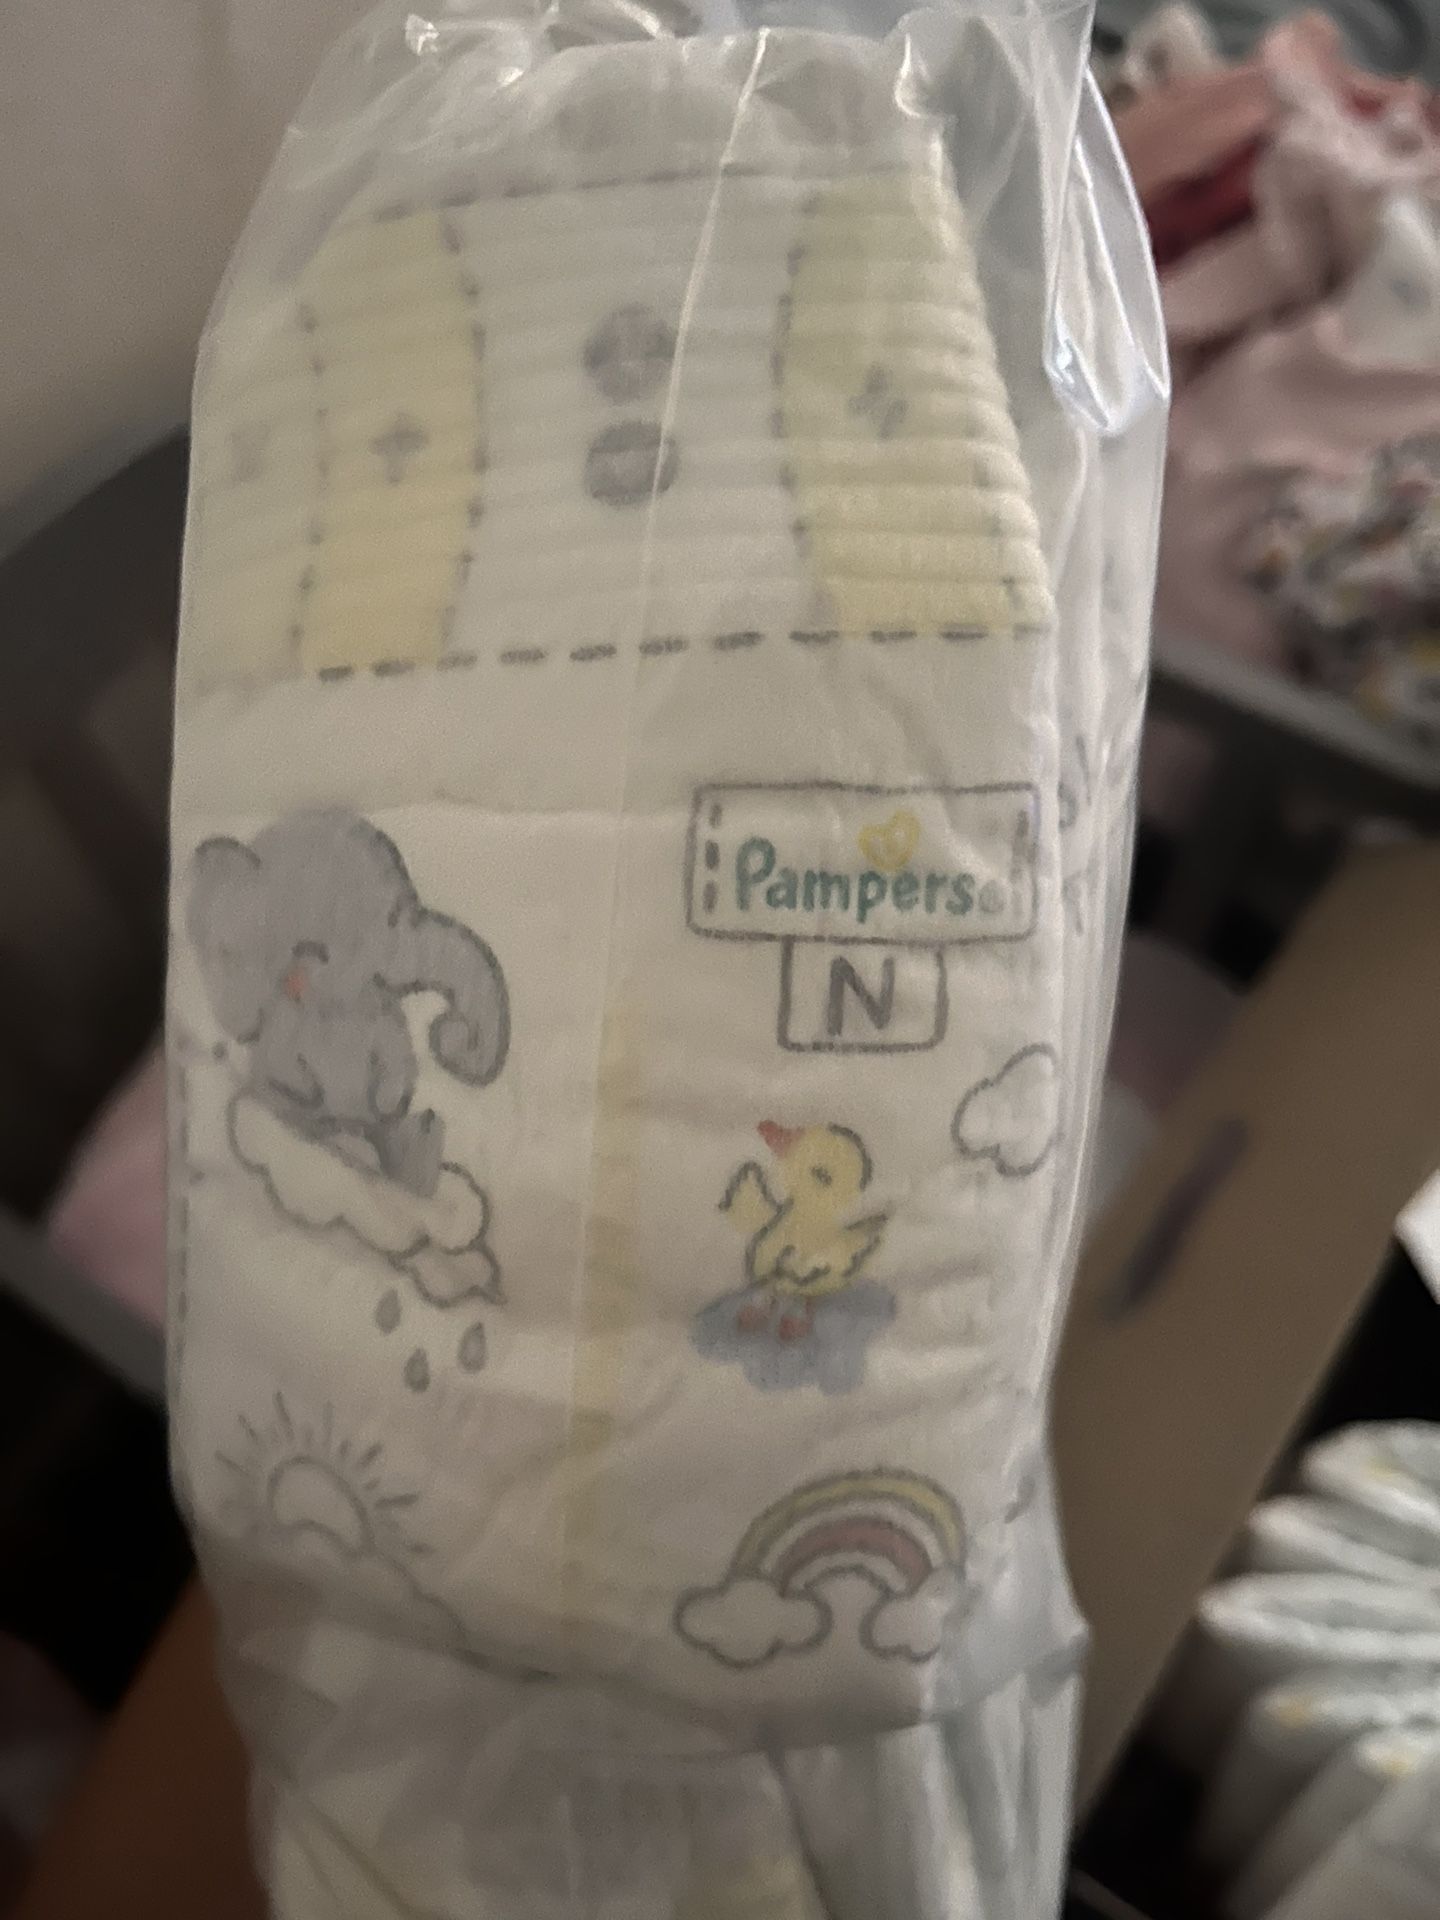 New Born Pampers Diapers